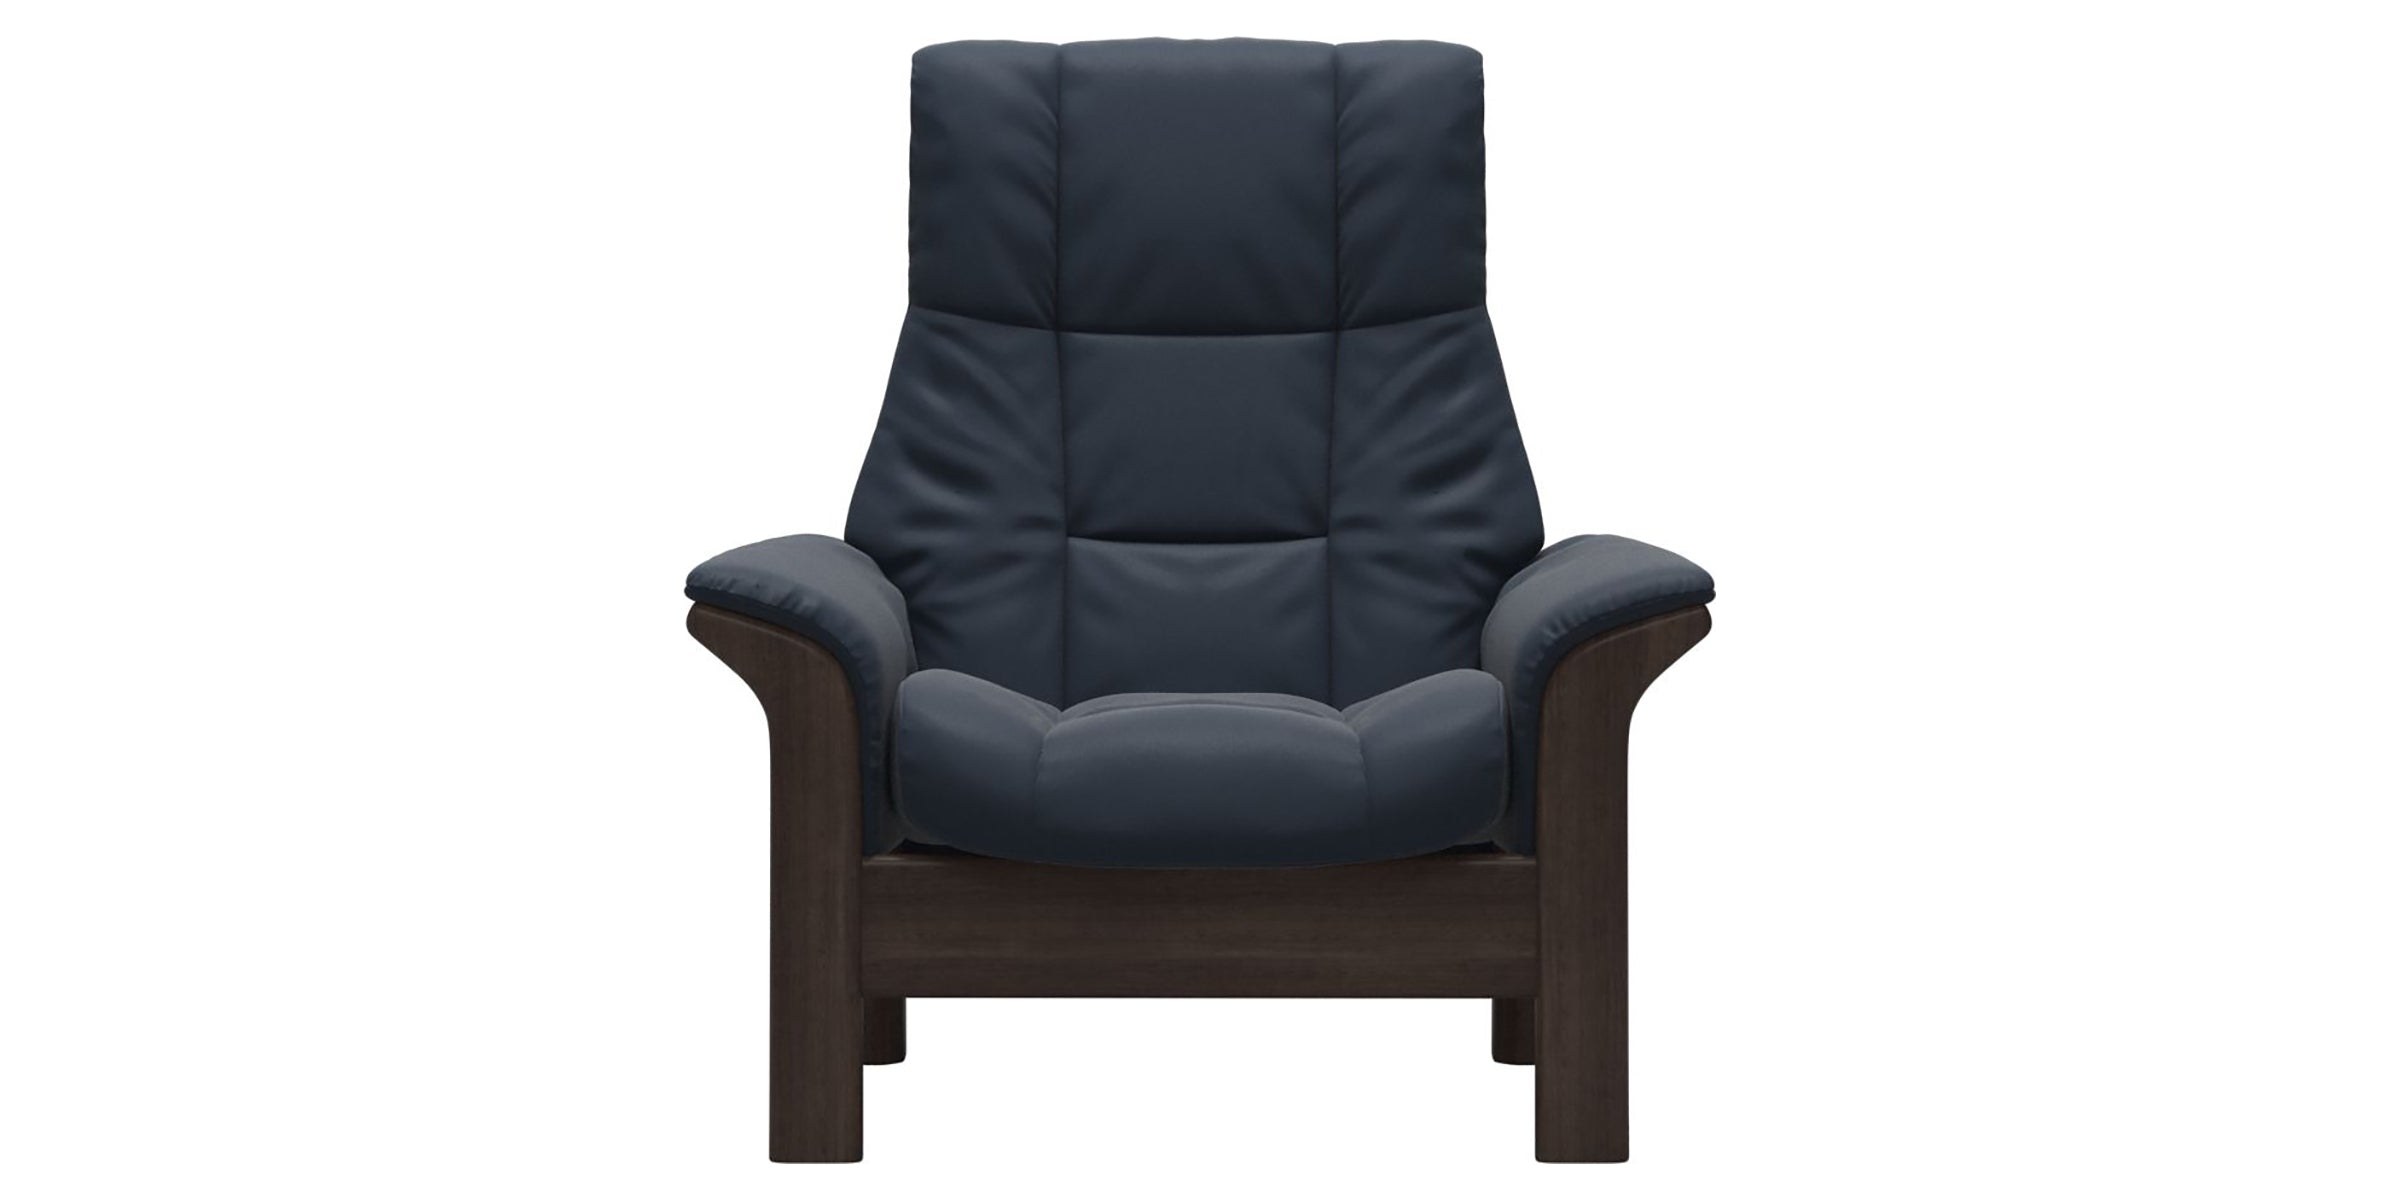 Paloma Leather Oxford Blue and Wenge Base | Stressless Windsor High Back Chair | Valley Ridge Furniture